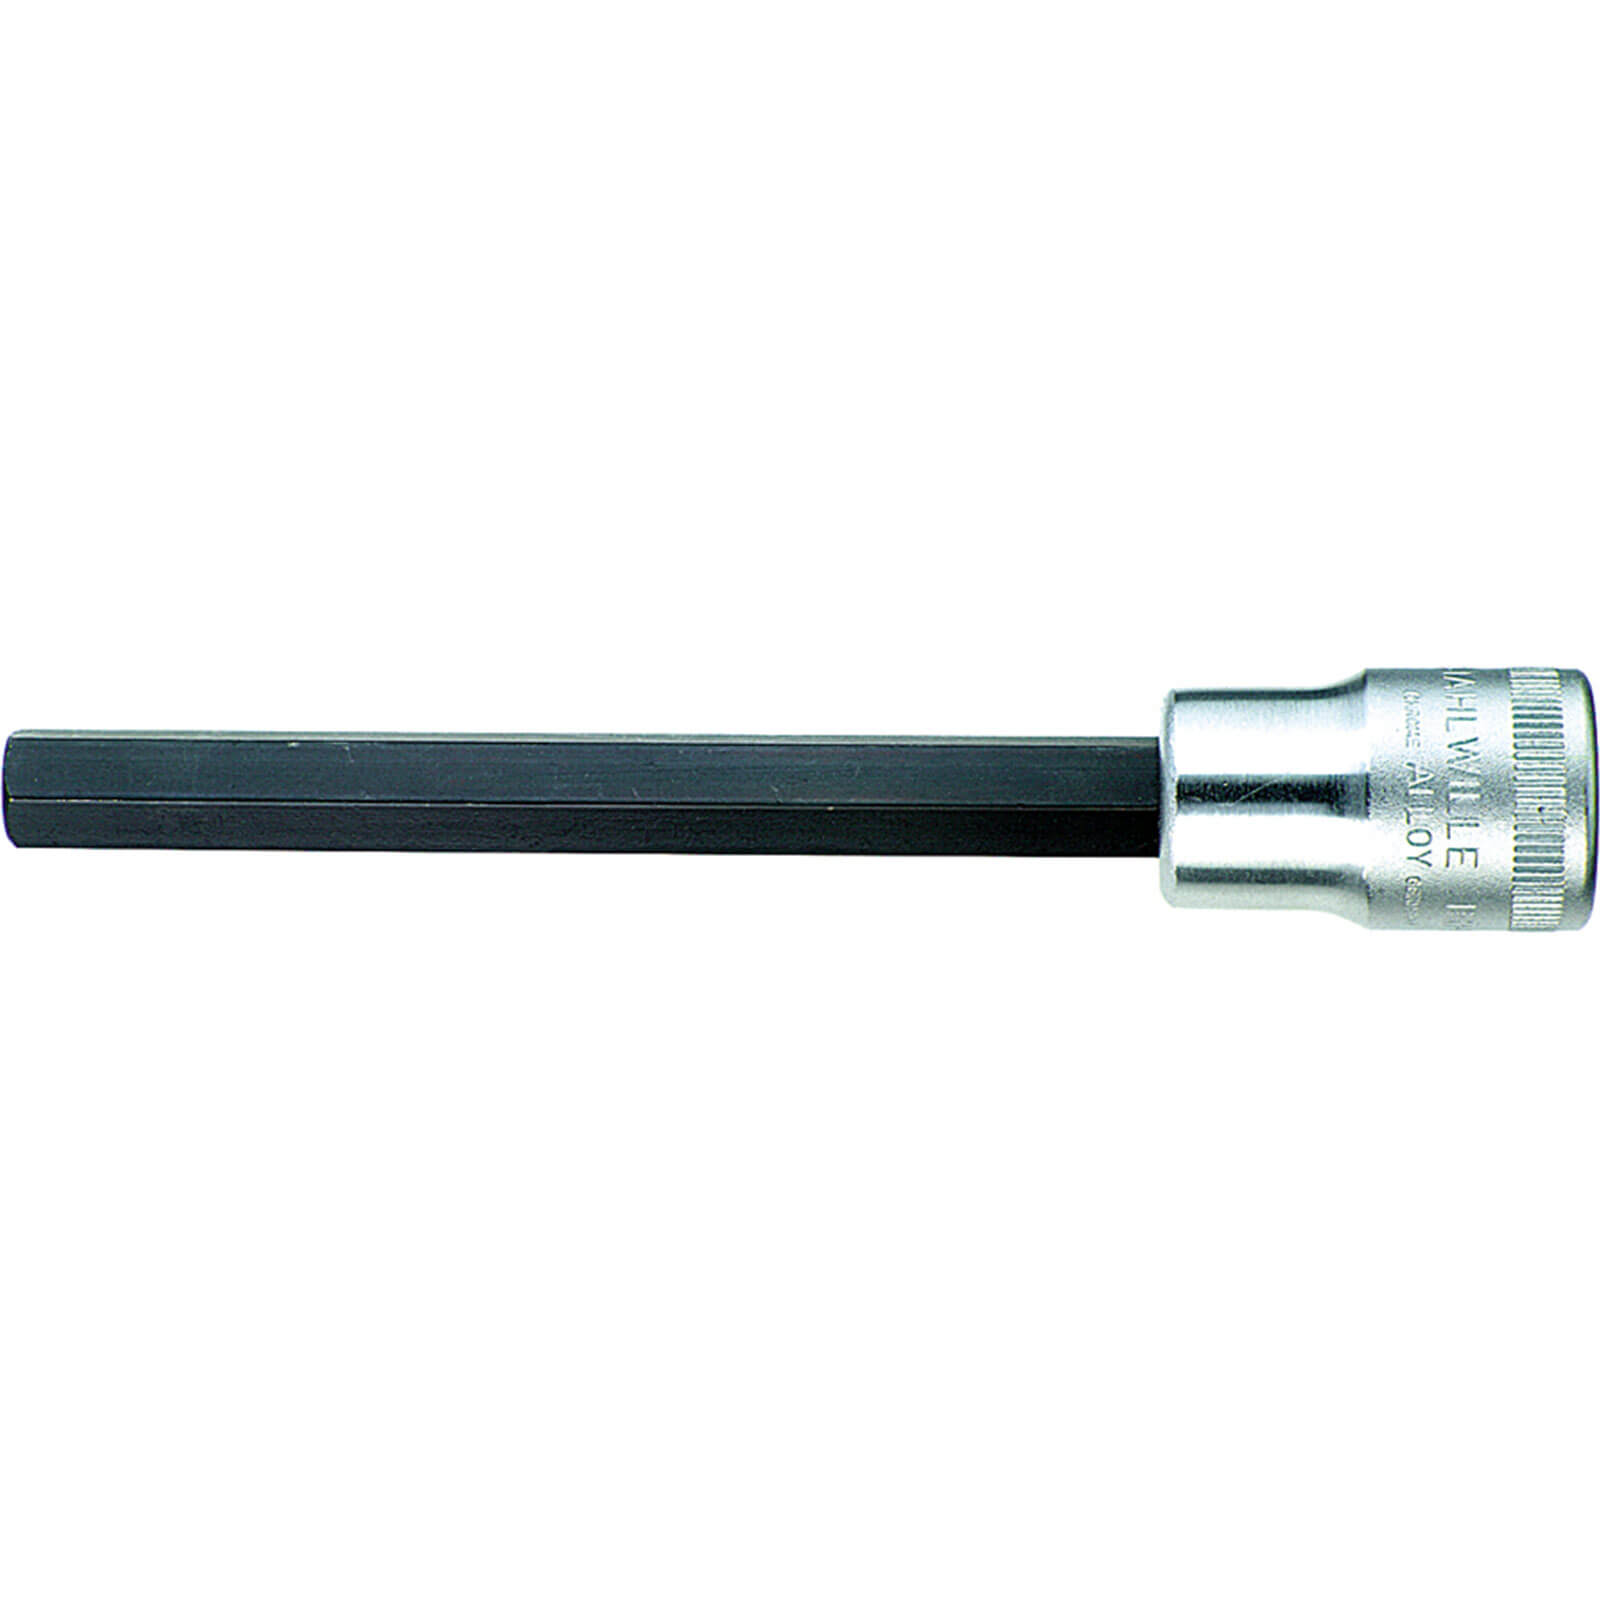 Image of Stahlwille 1/2" Drive Extra Long Hexagon Socket Bit 1/2" 8mm